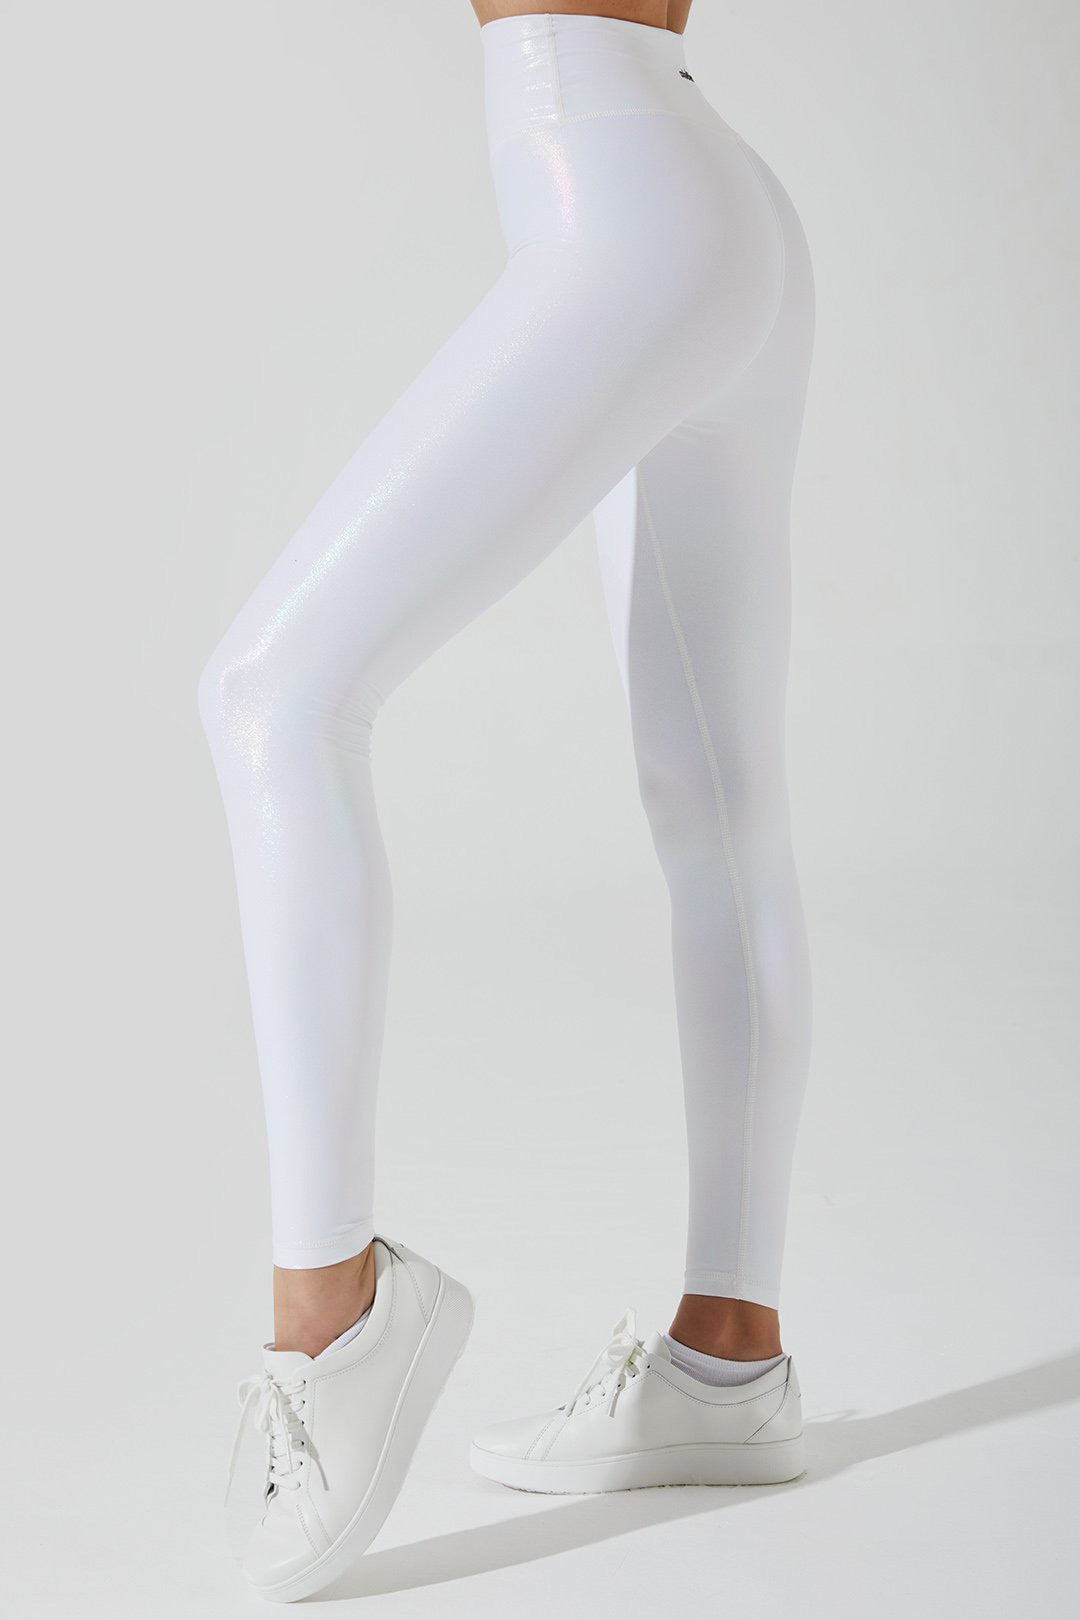 Stylish snow white women's leggings with an iridescent finish, perfect for winter fashion.